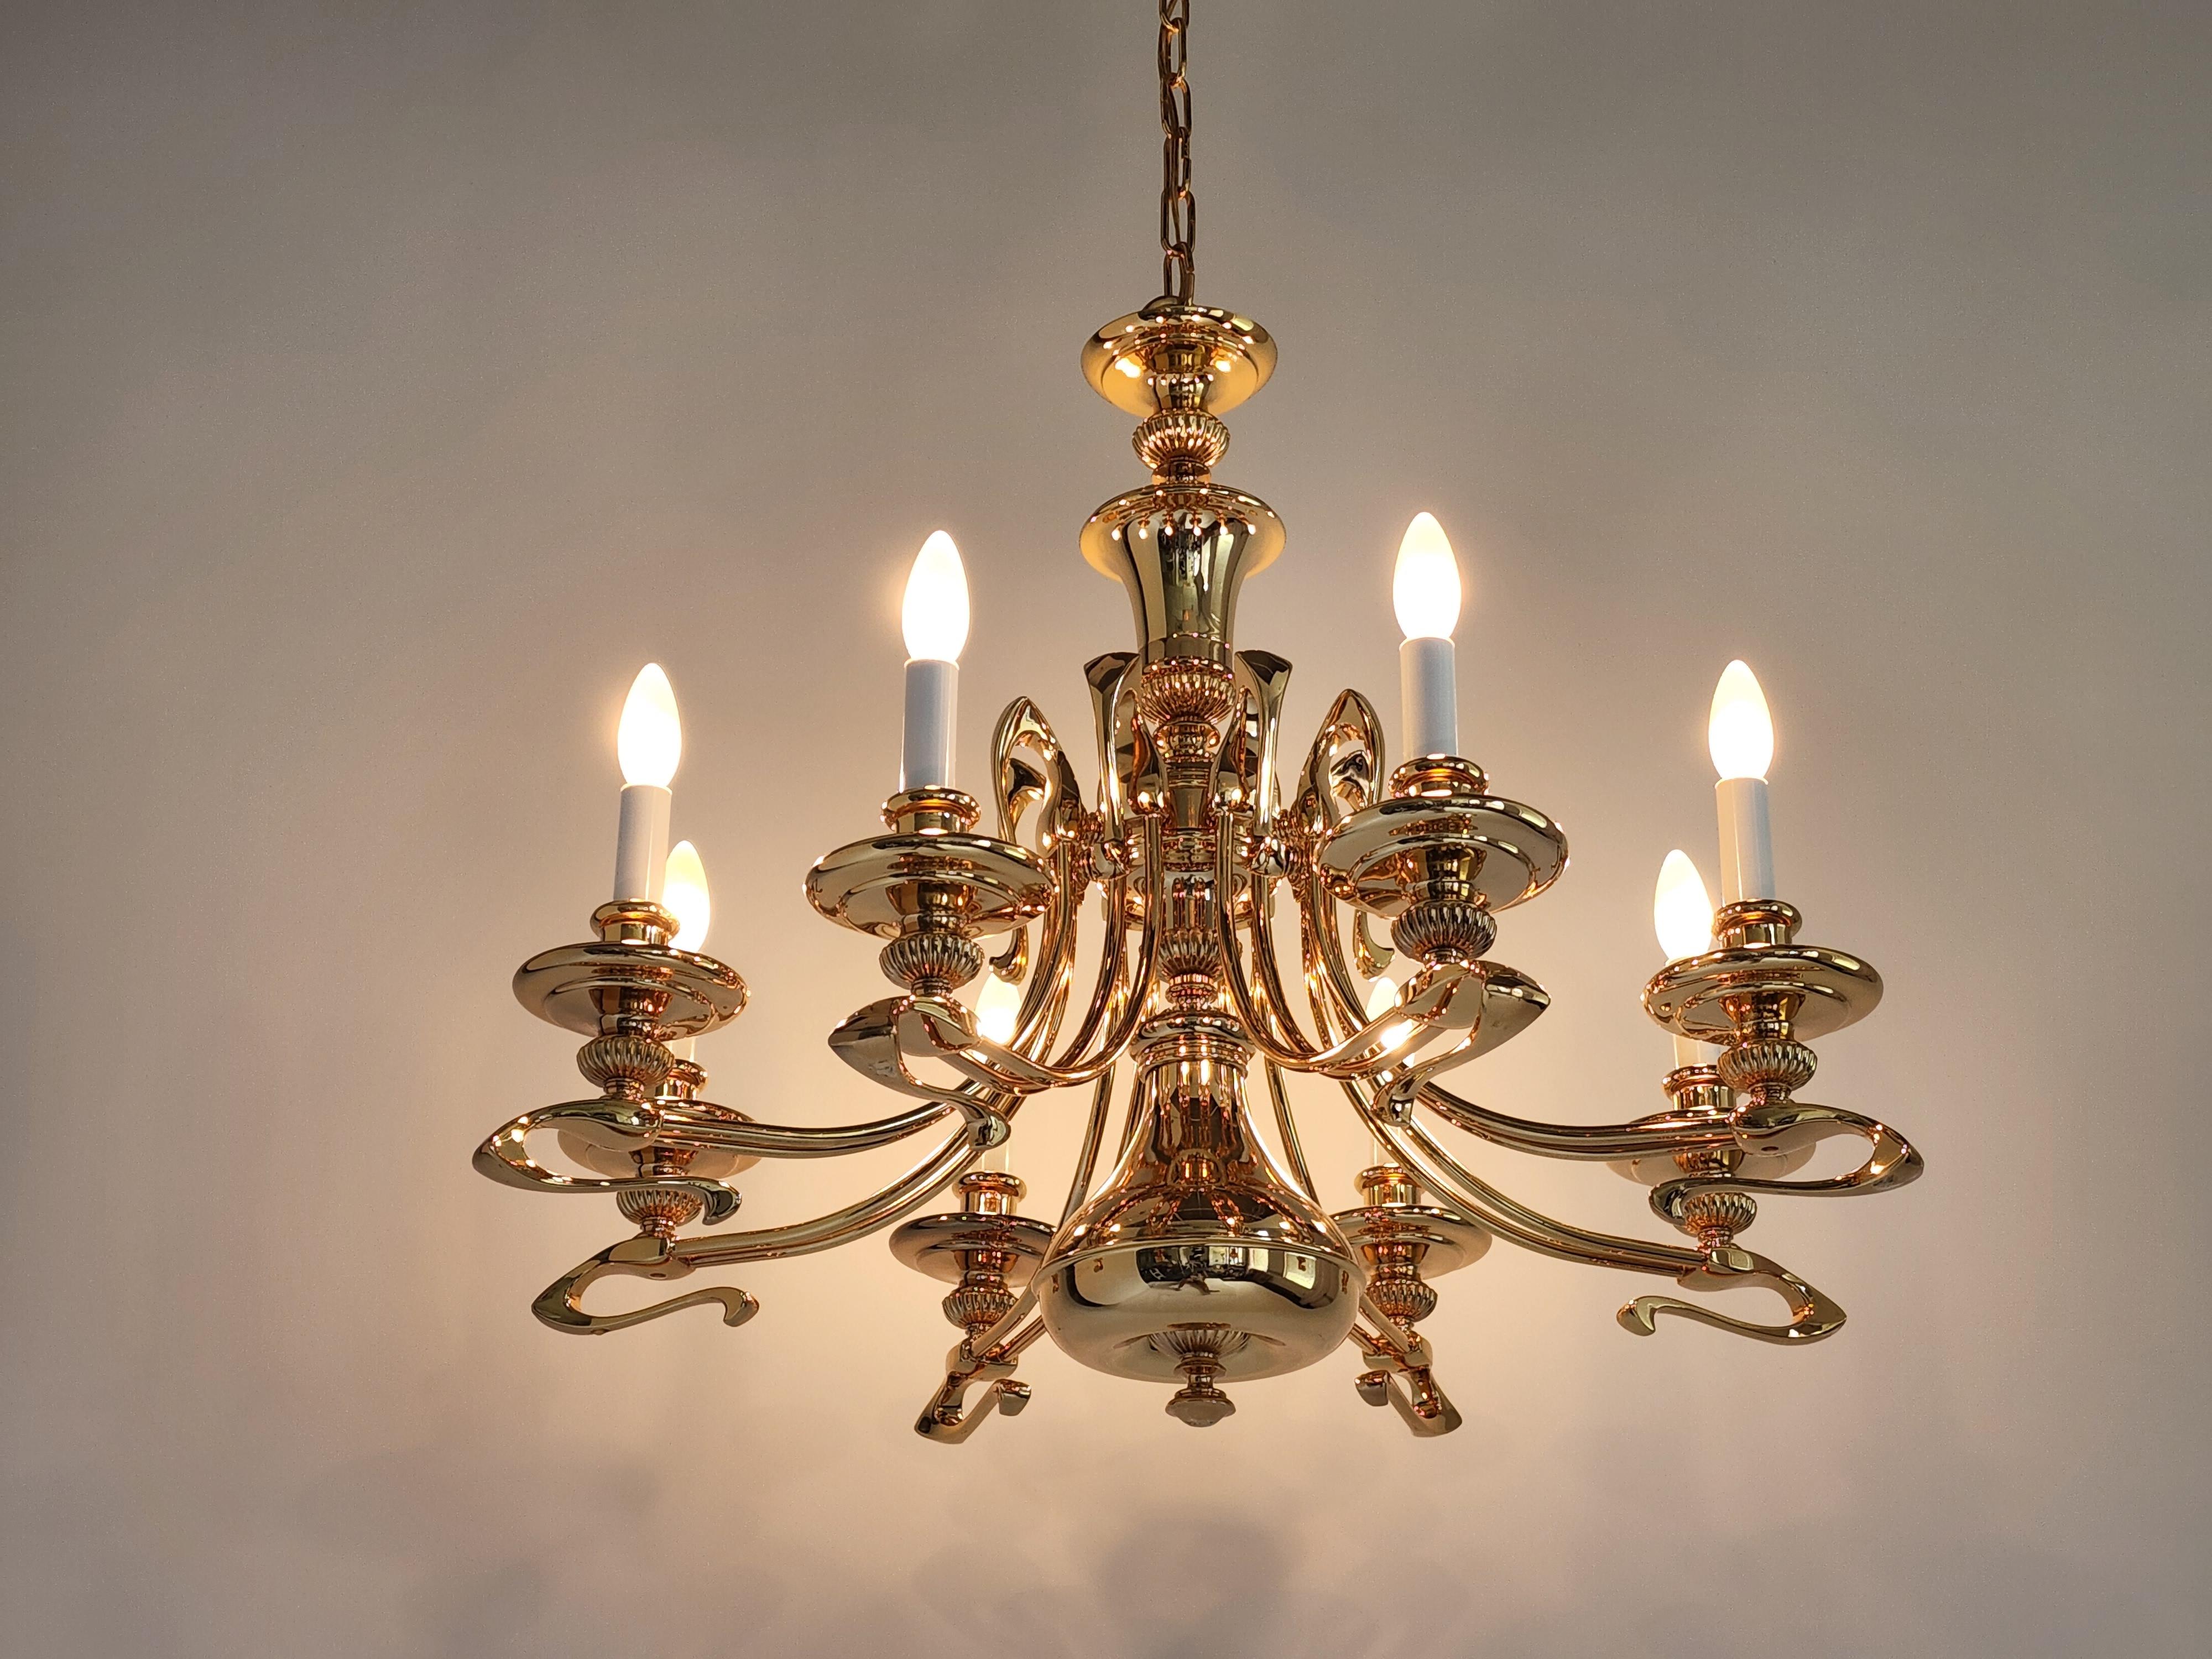 1980s Massive Art Nouveau Style Gold Plated Chandelier, Italy For Sale 2